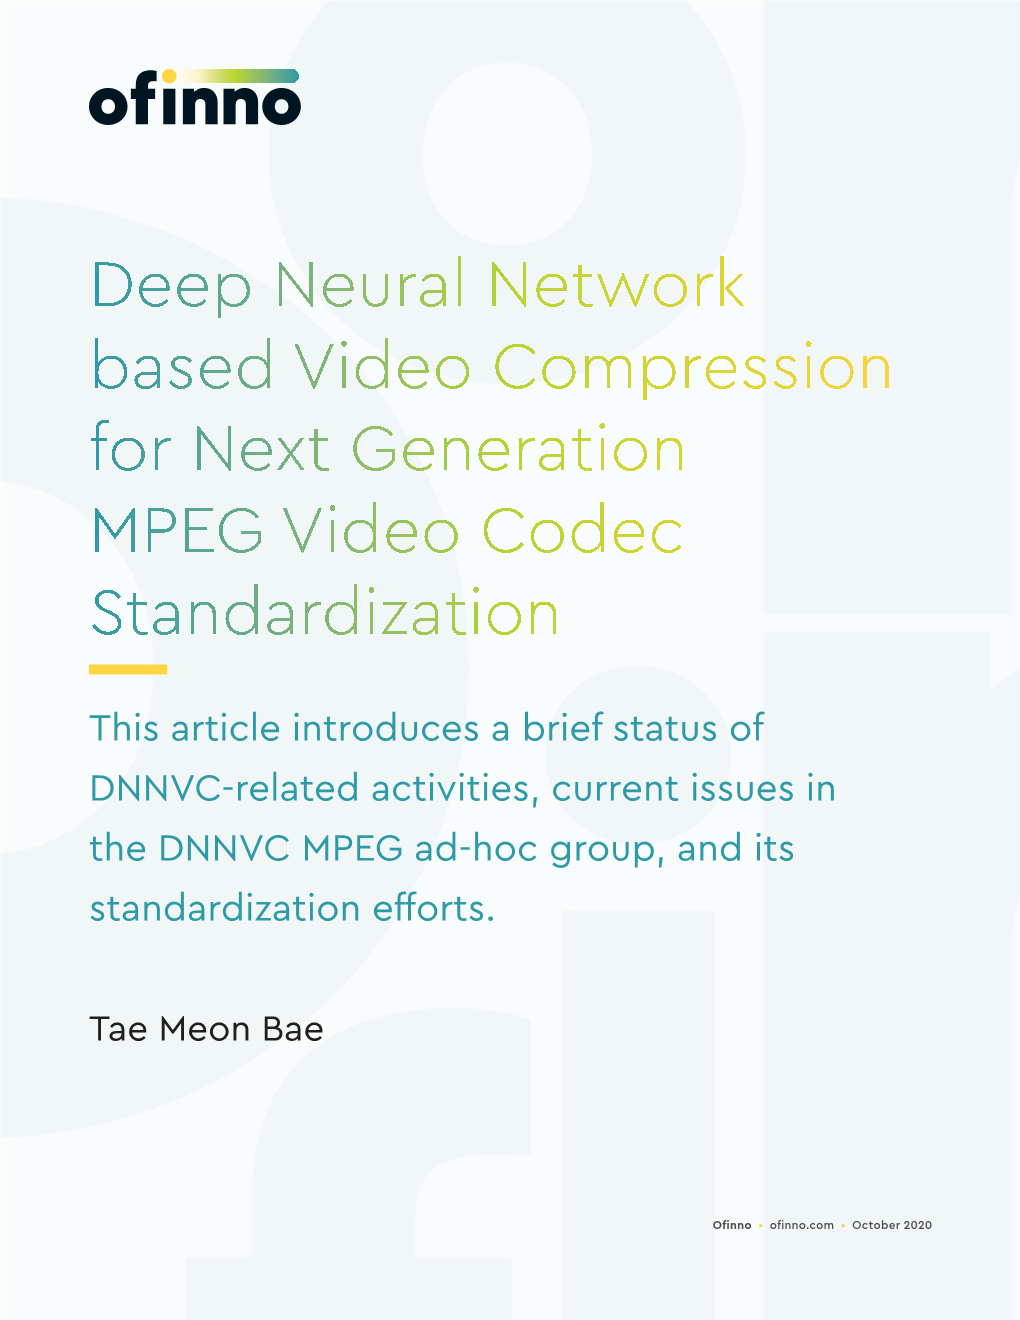 Deep Neural Network Based Video Compression for Next Generation MPEG Video Codec Standardization